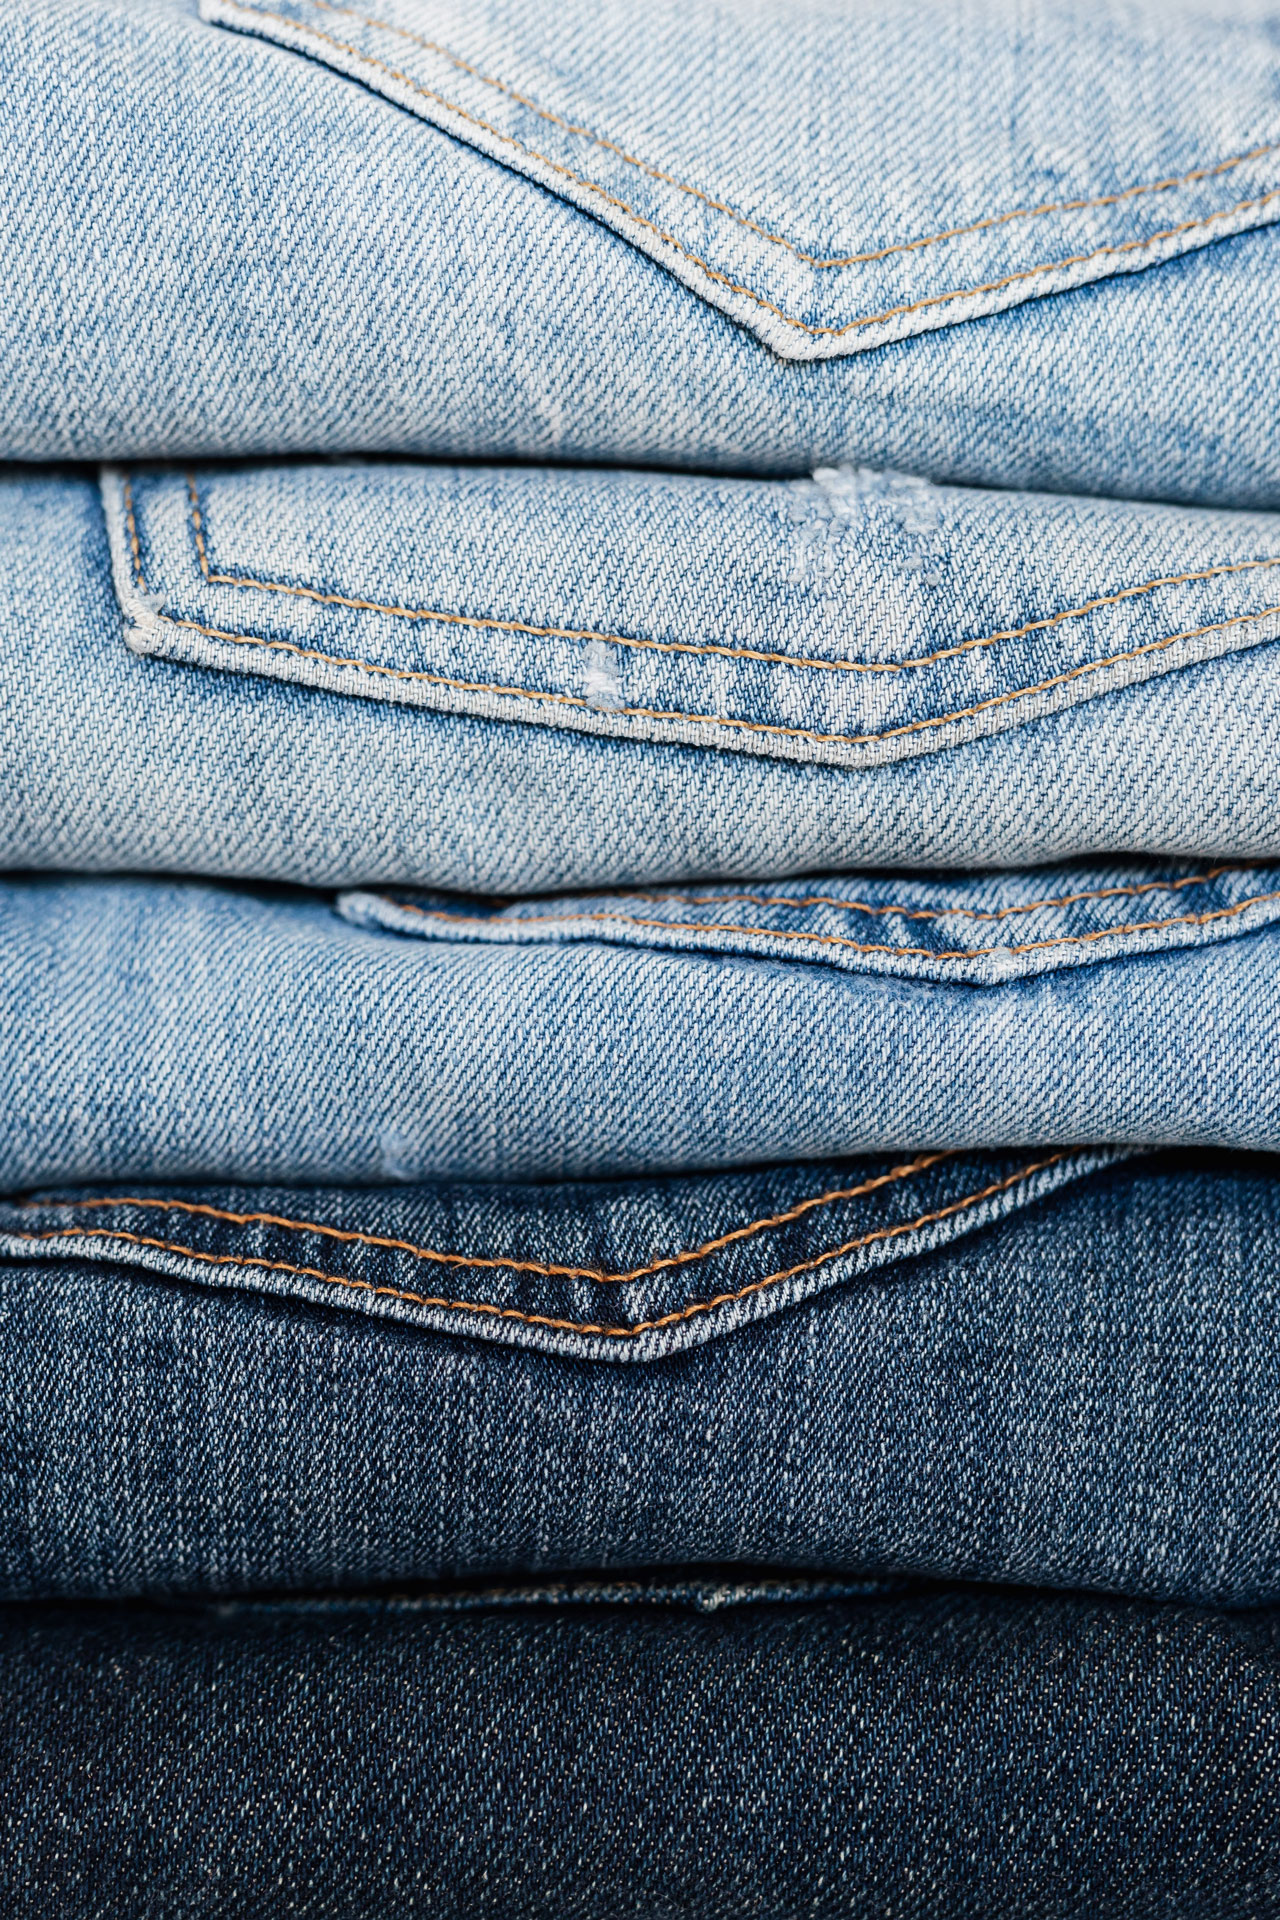 The factors of the Denim fabrics that contributes to Lycra breakage during  industrial Washing